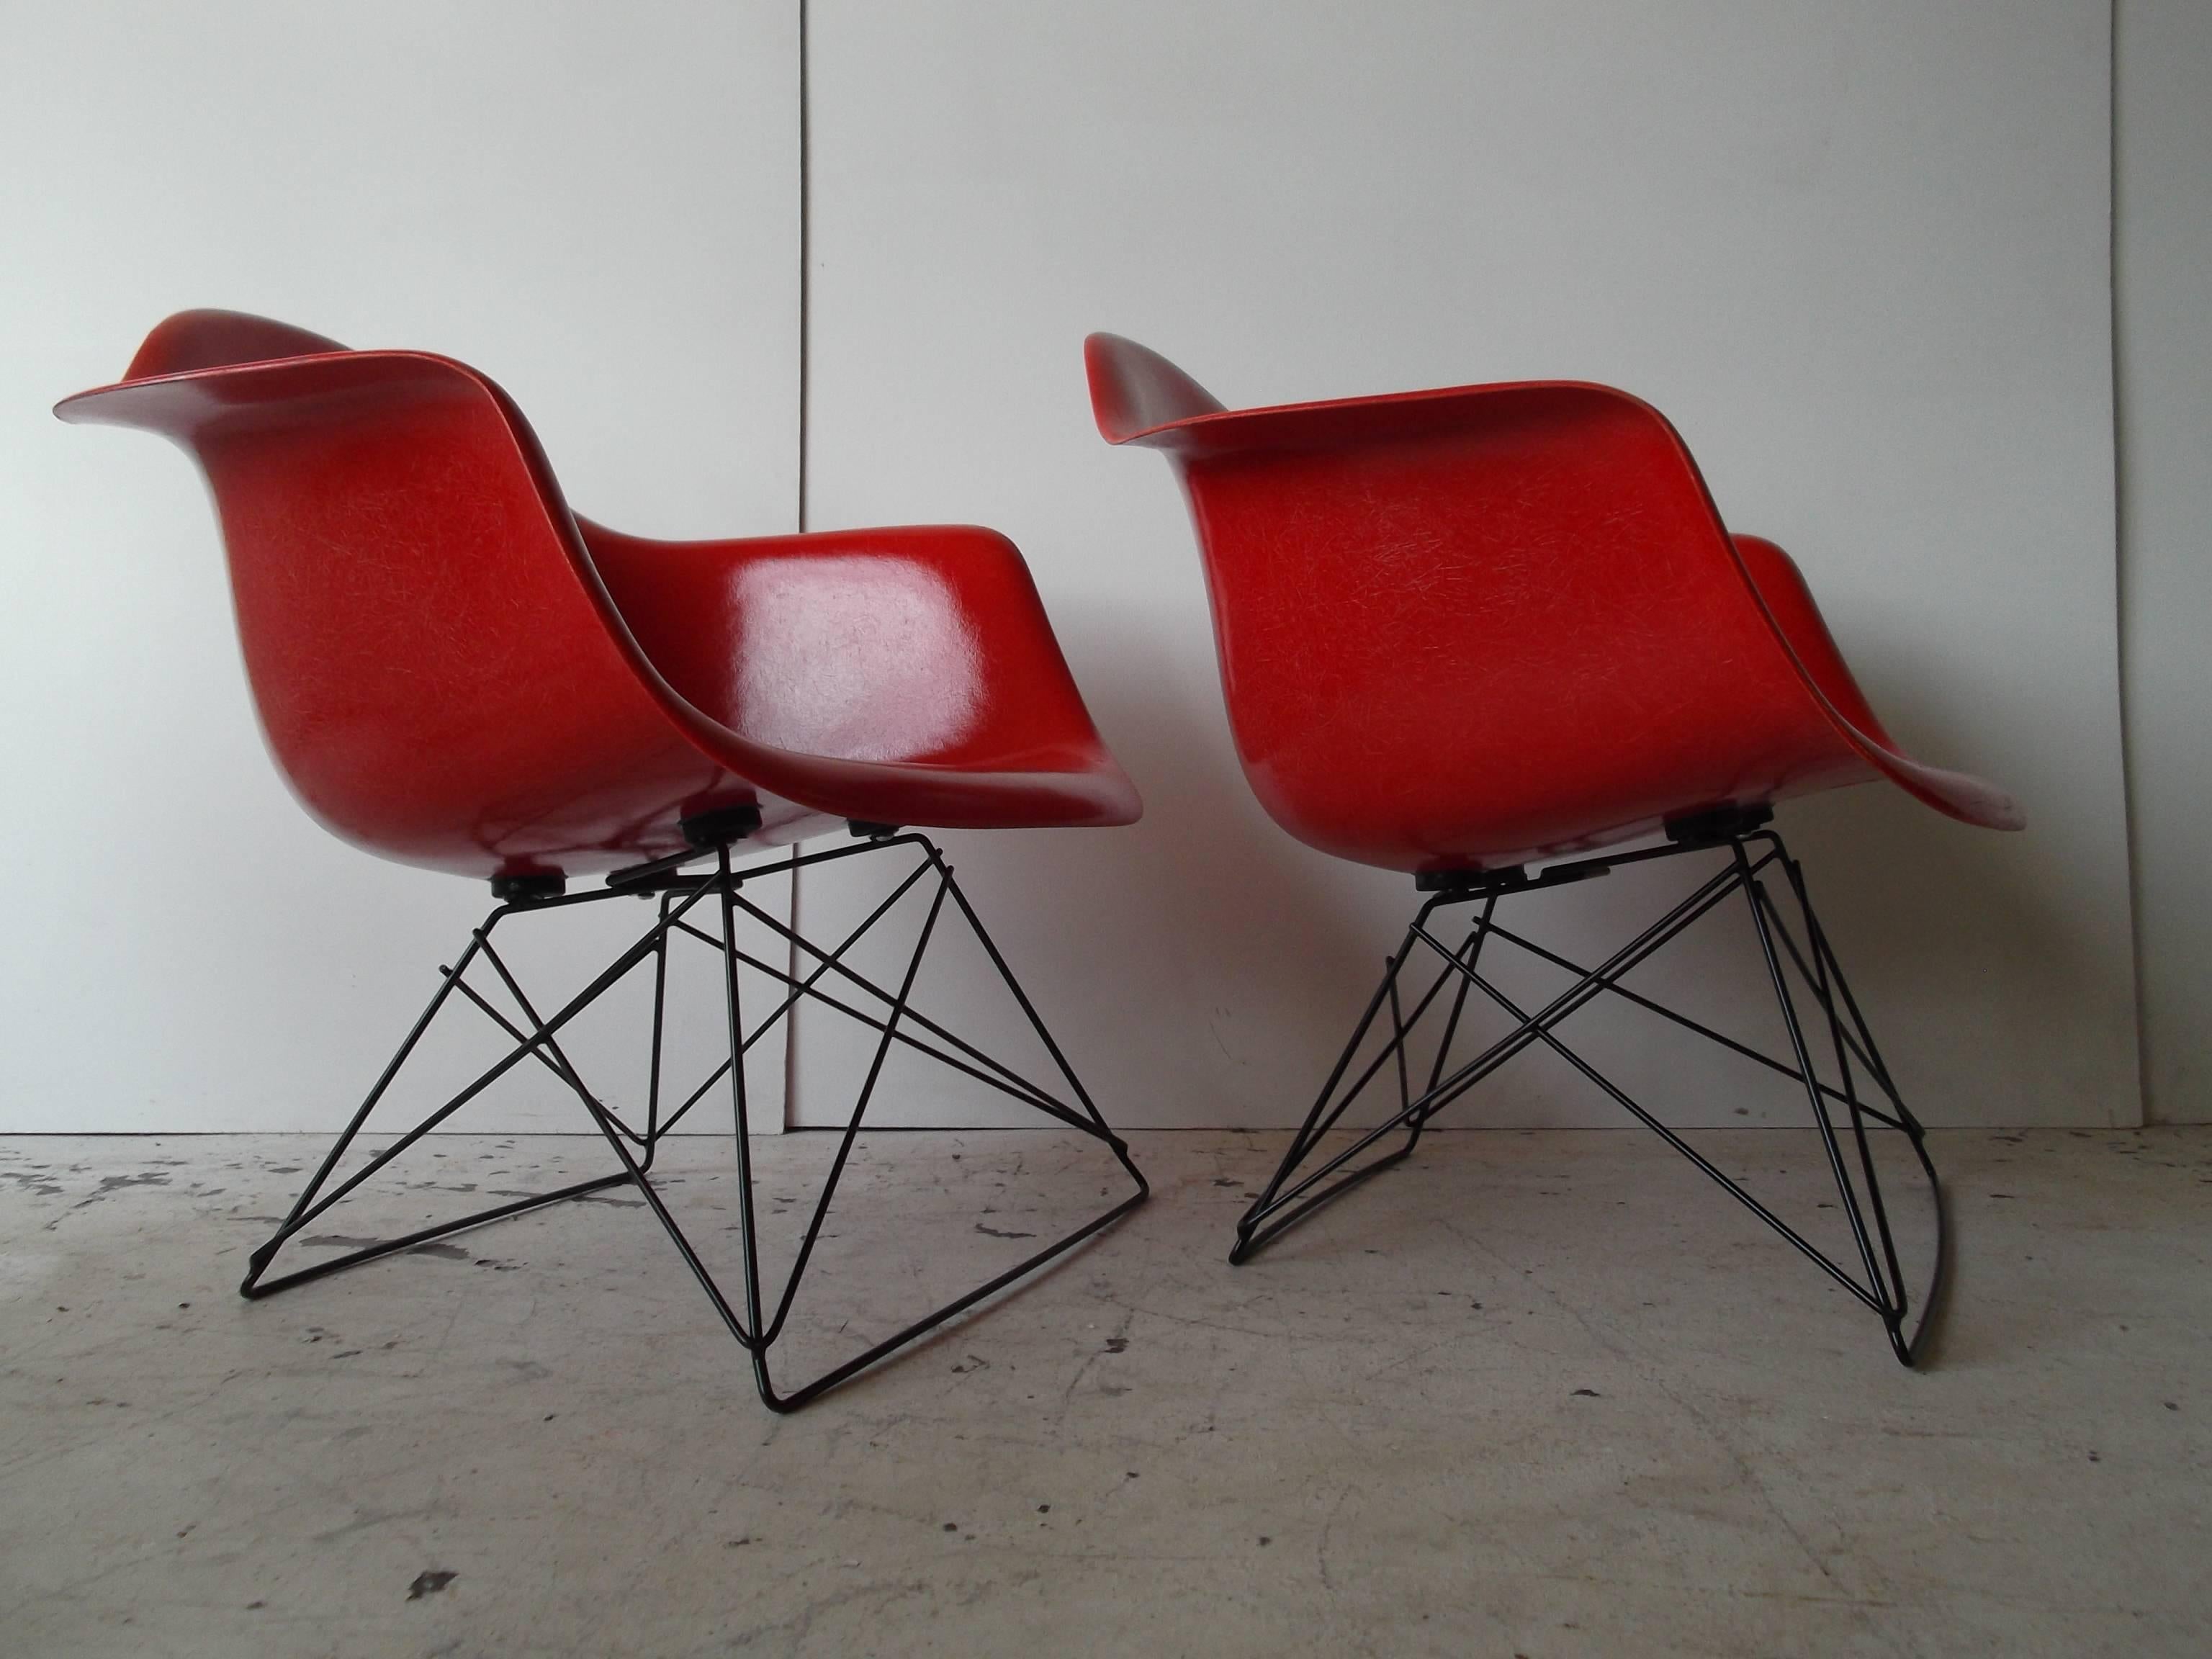 20th Century Charles Eames Herman Miller True Red Fiberglass Chairs For Sale